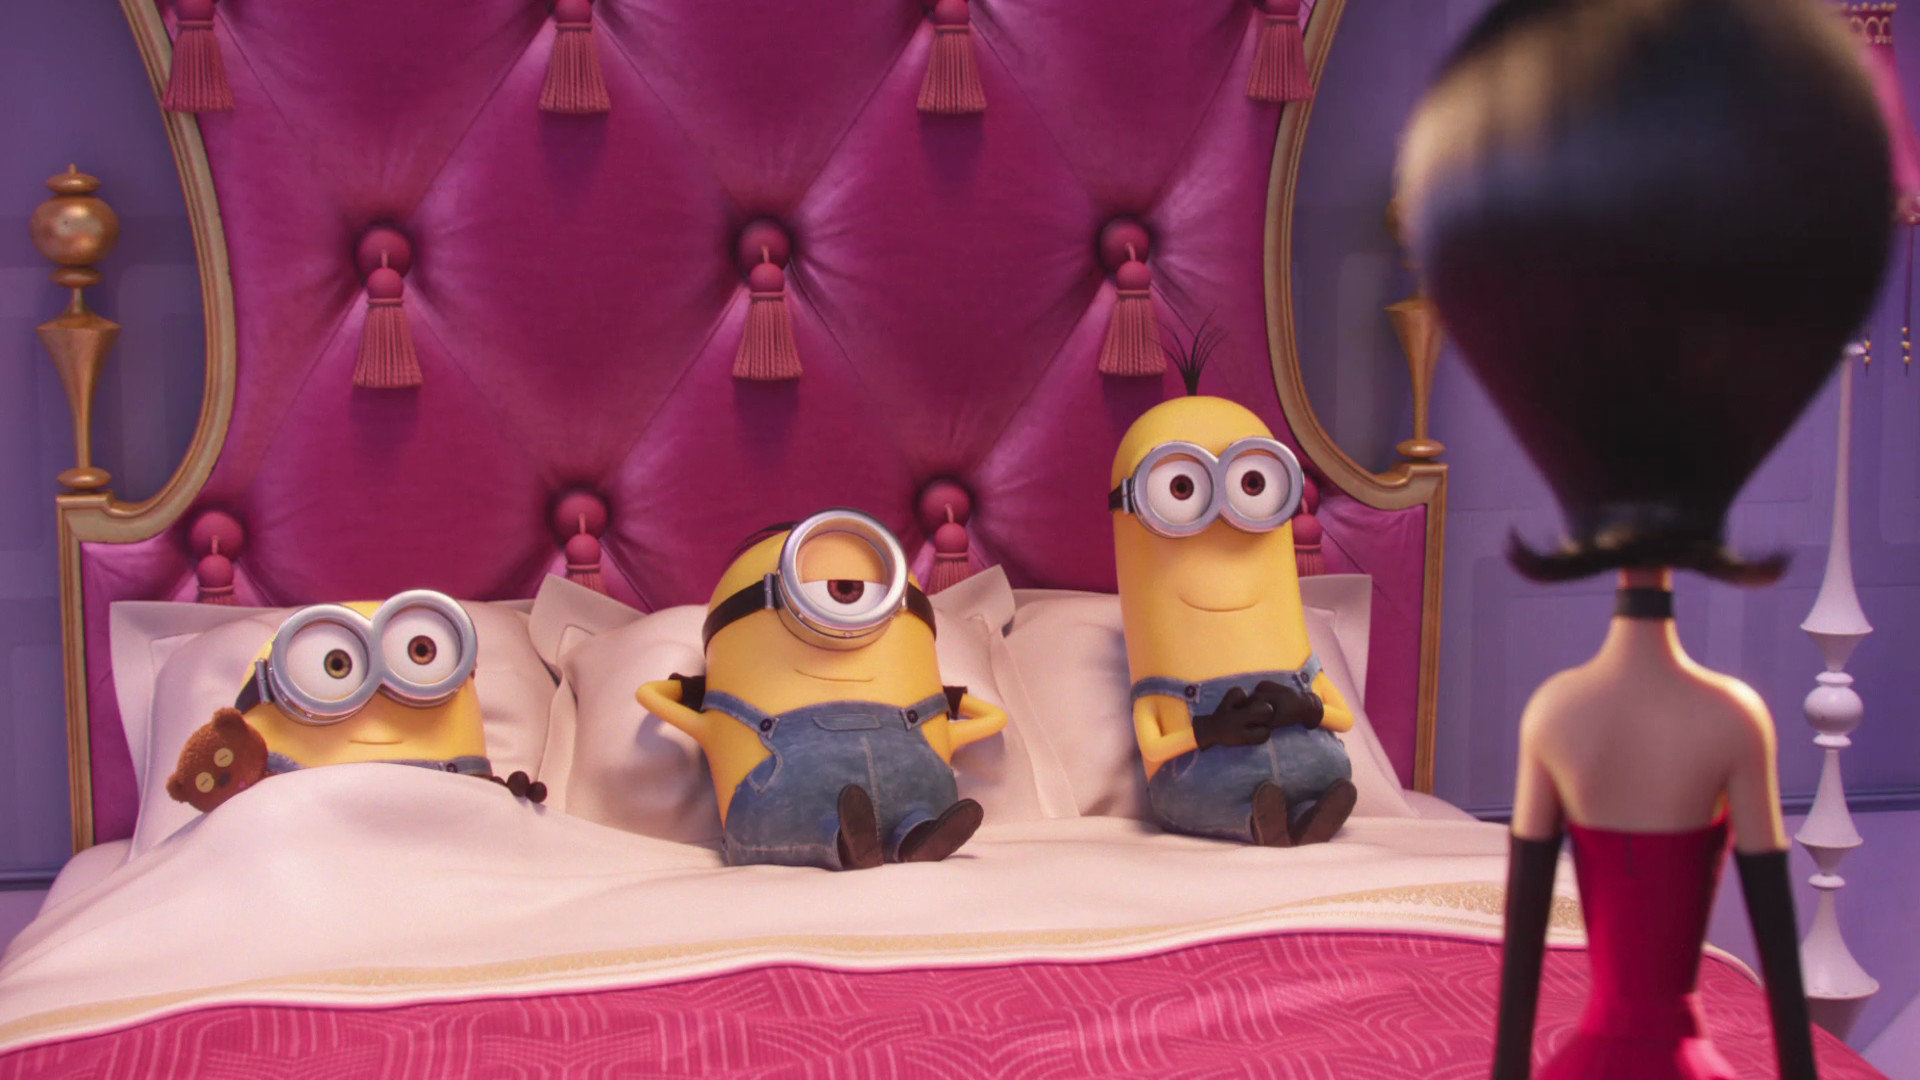 Free Download Minions Wallpaper Id - Minions In Bed , HD Wallpaper & Backgrounds